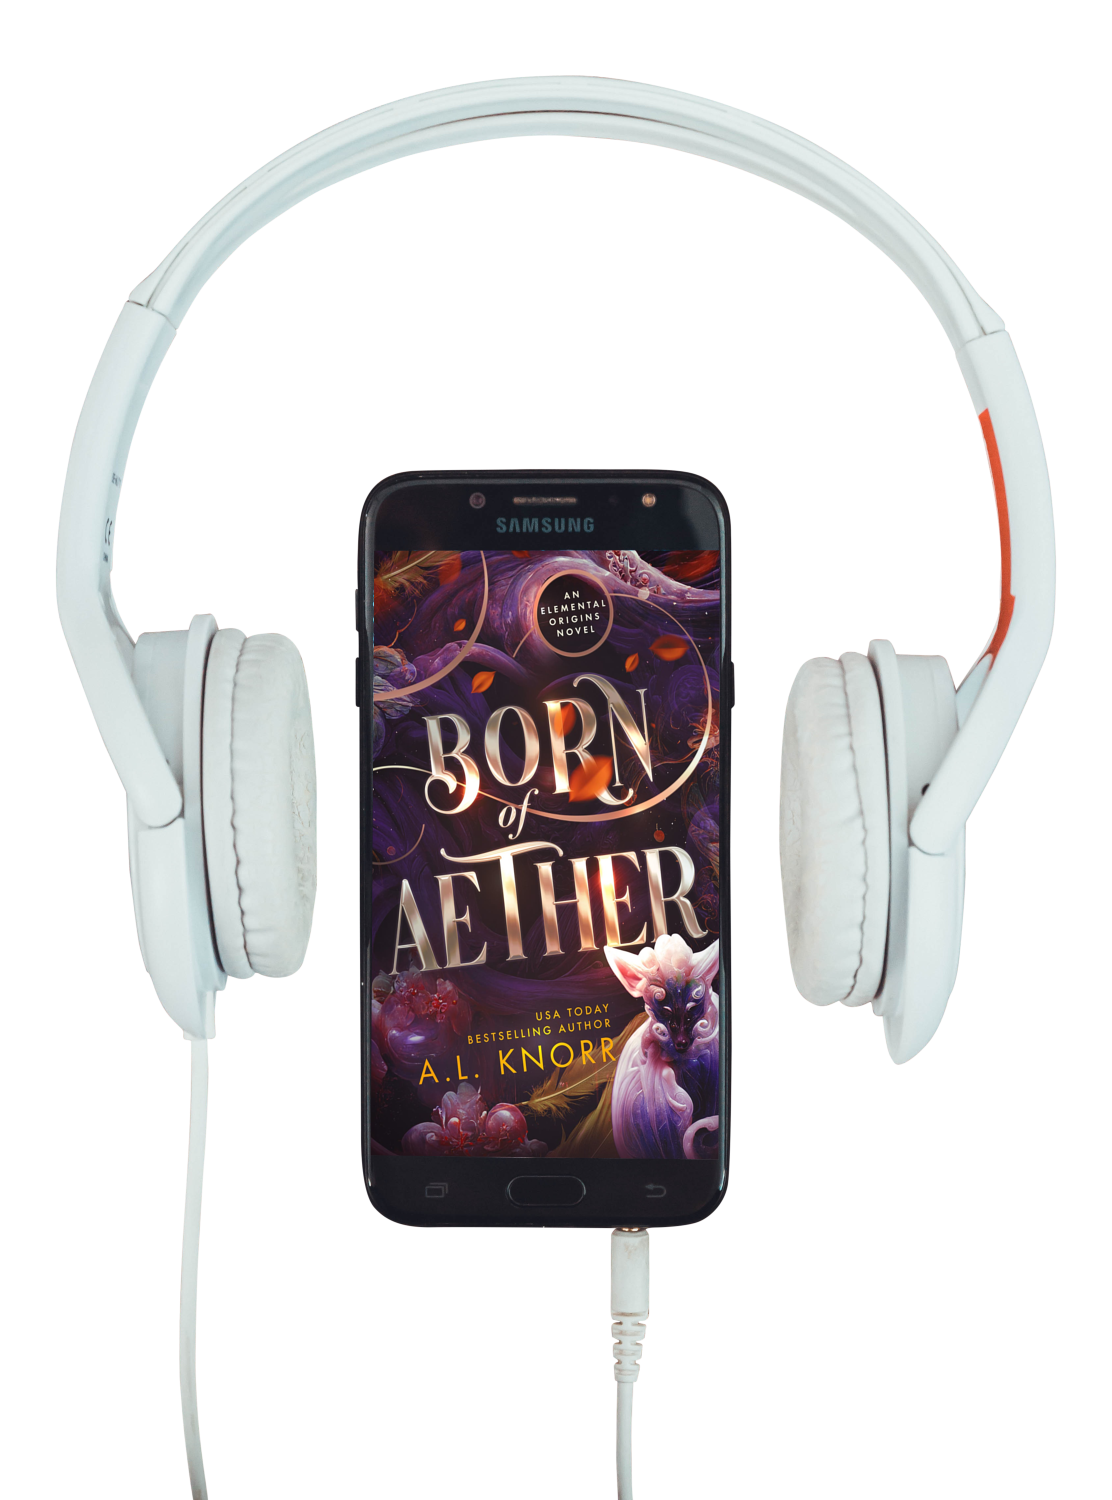 Born of Aether audiobook graphic with headphones